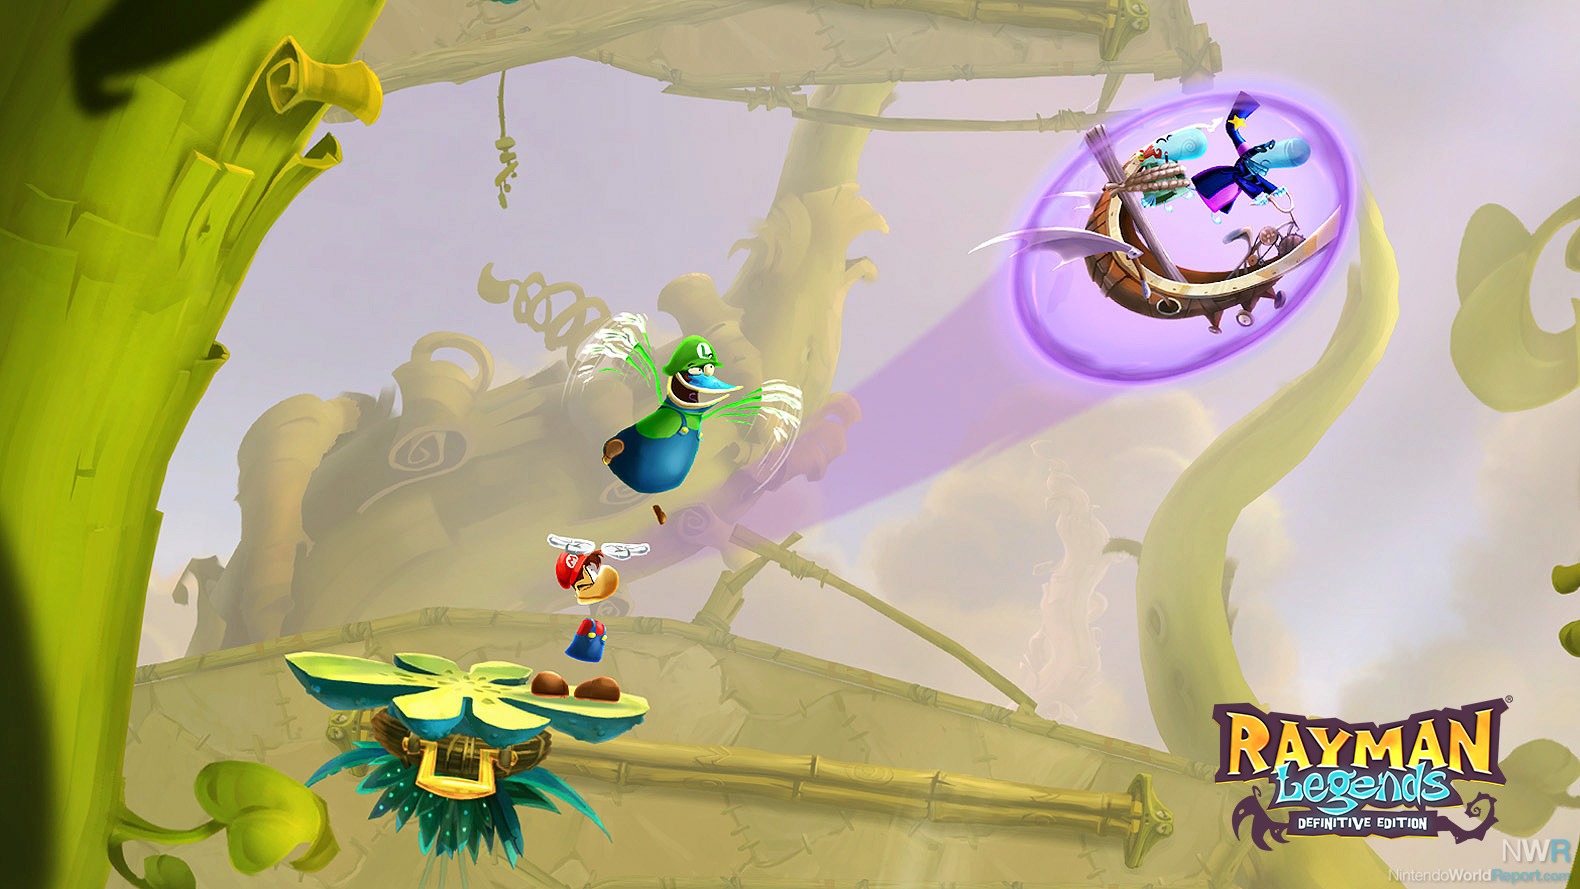 Rayman Legends: Definitive Edition Review - Review - Nintendo World Report